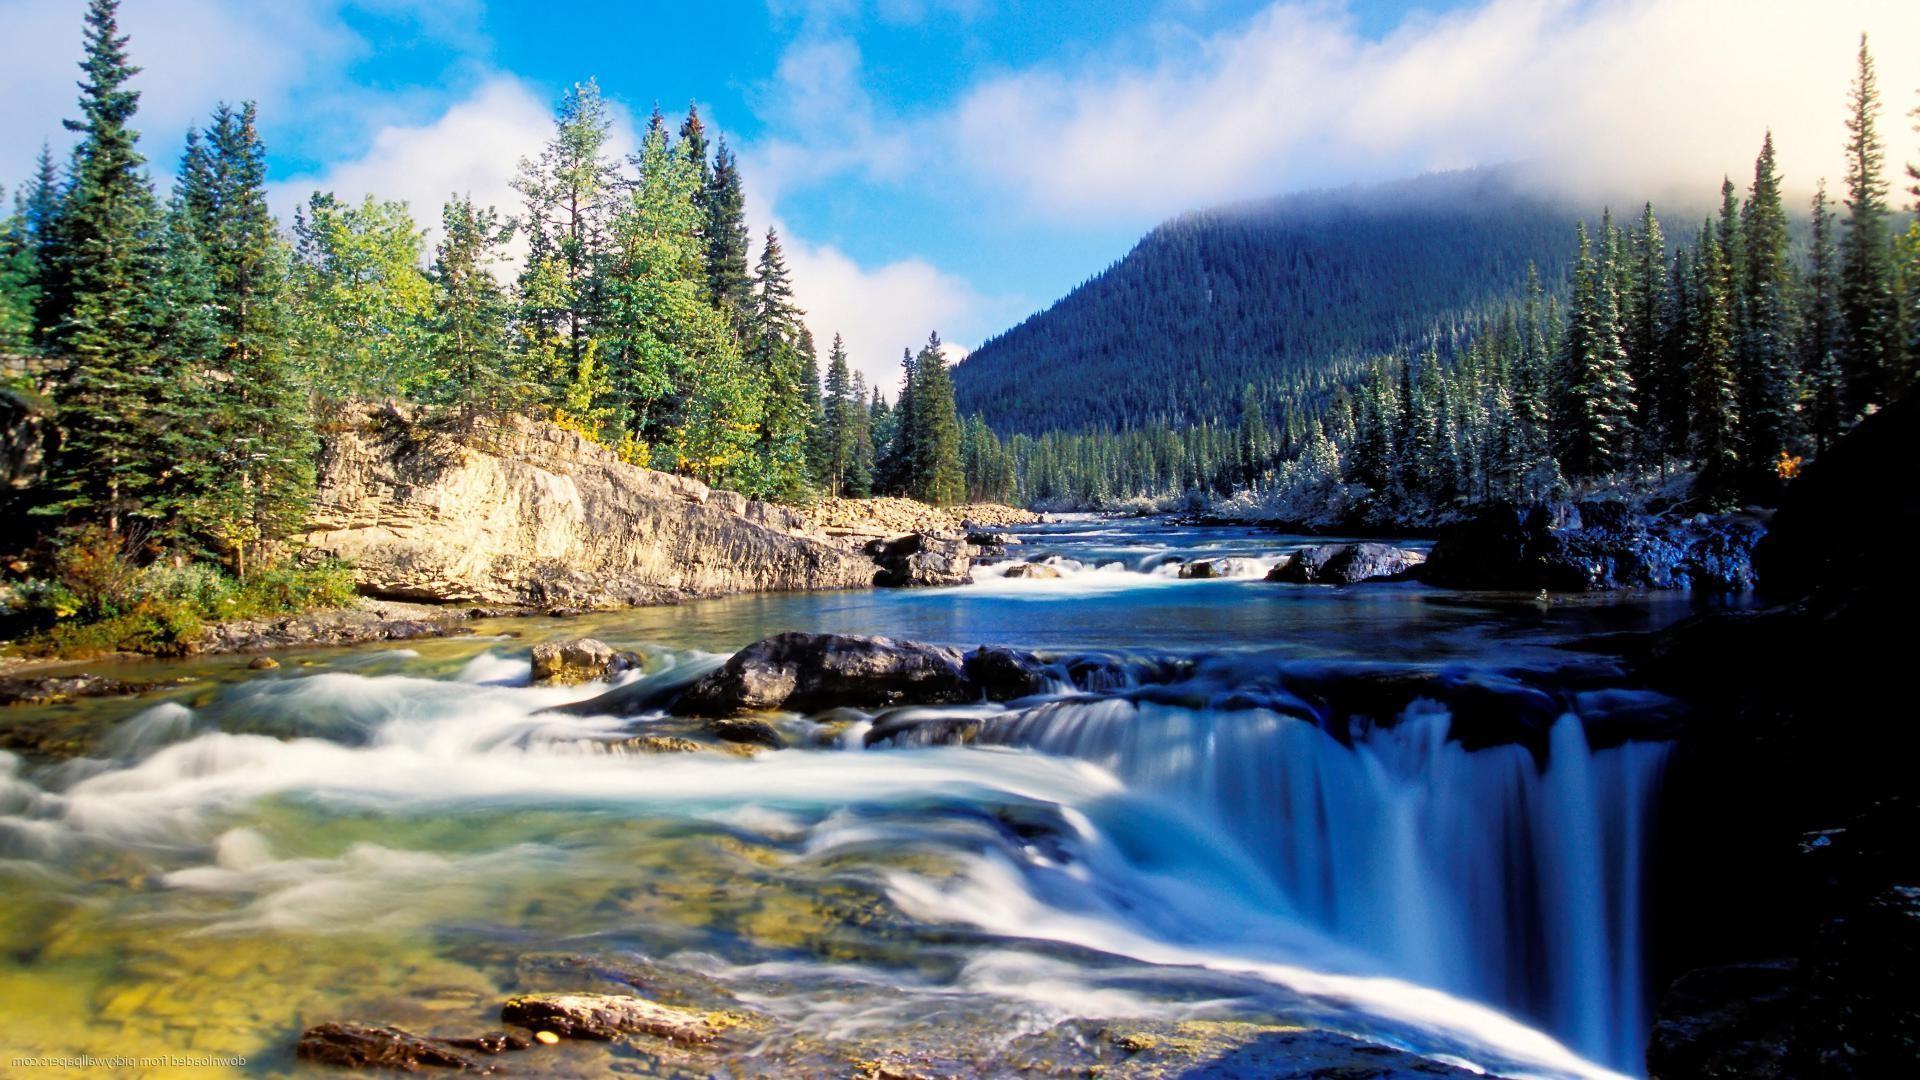 Mountain River At Summer Forest Landscape Widescreen Image